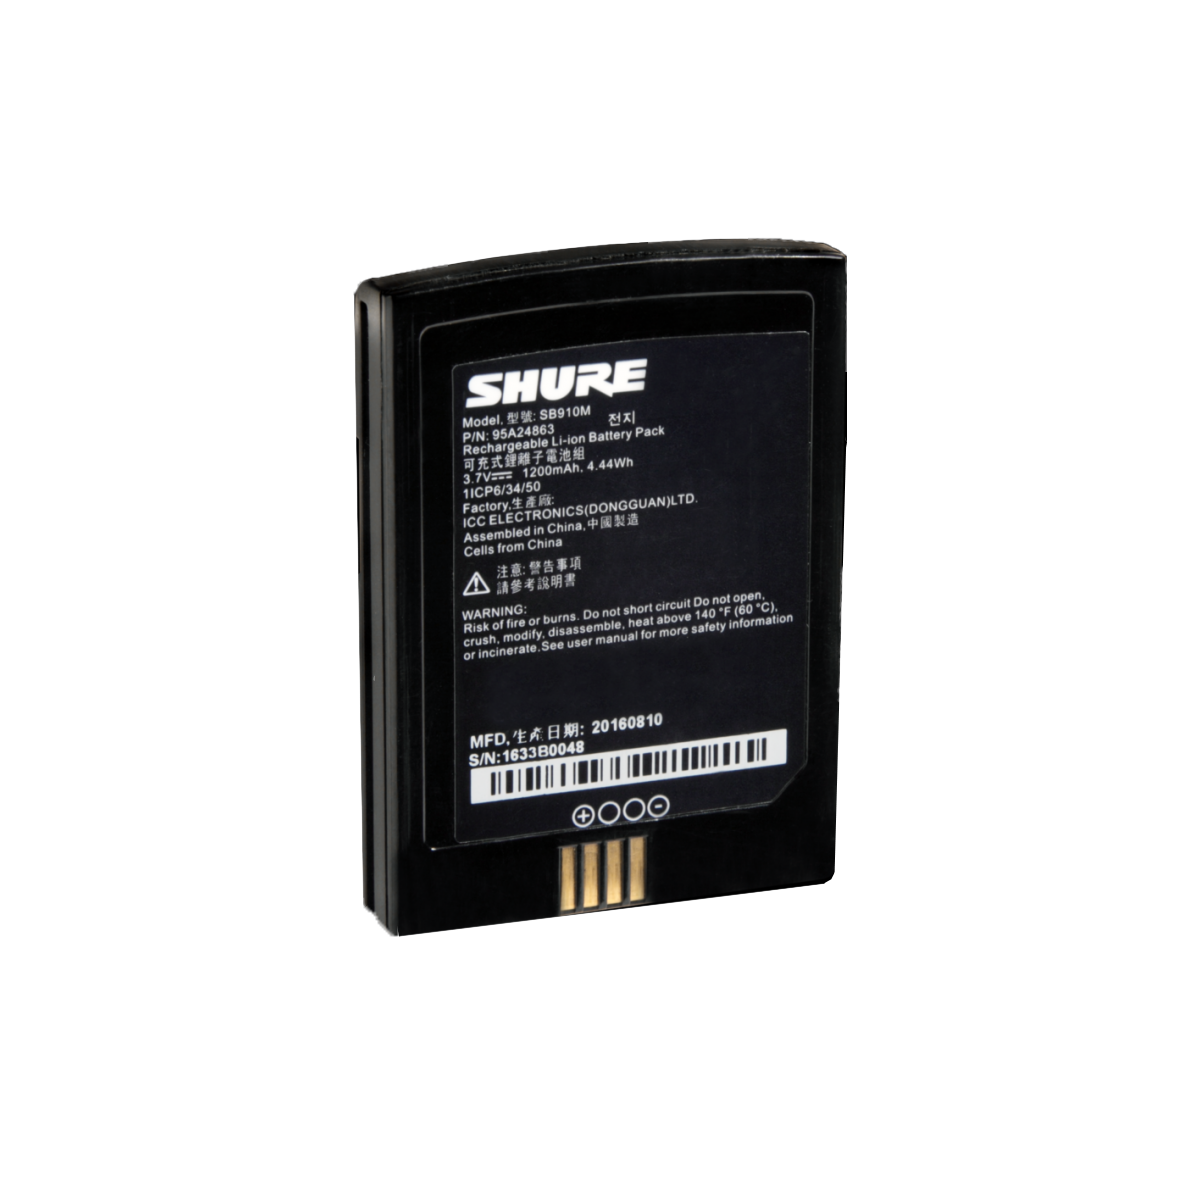 SB910M Lithium-Ion Rechargeable Battery